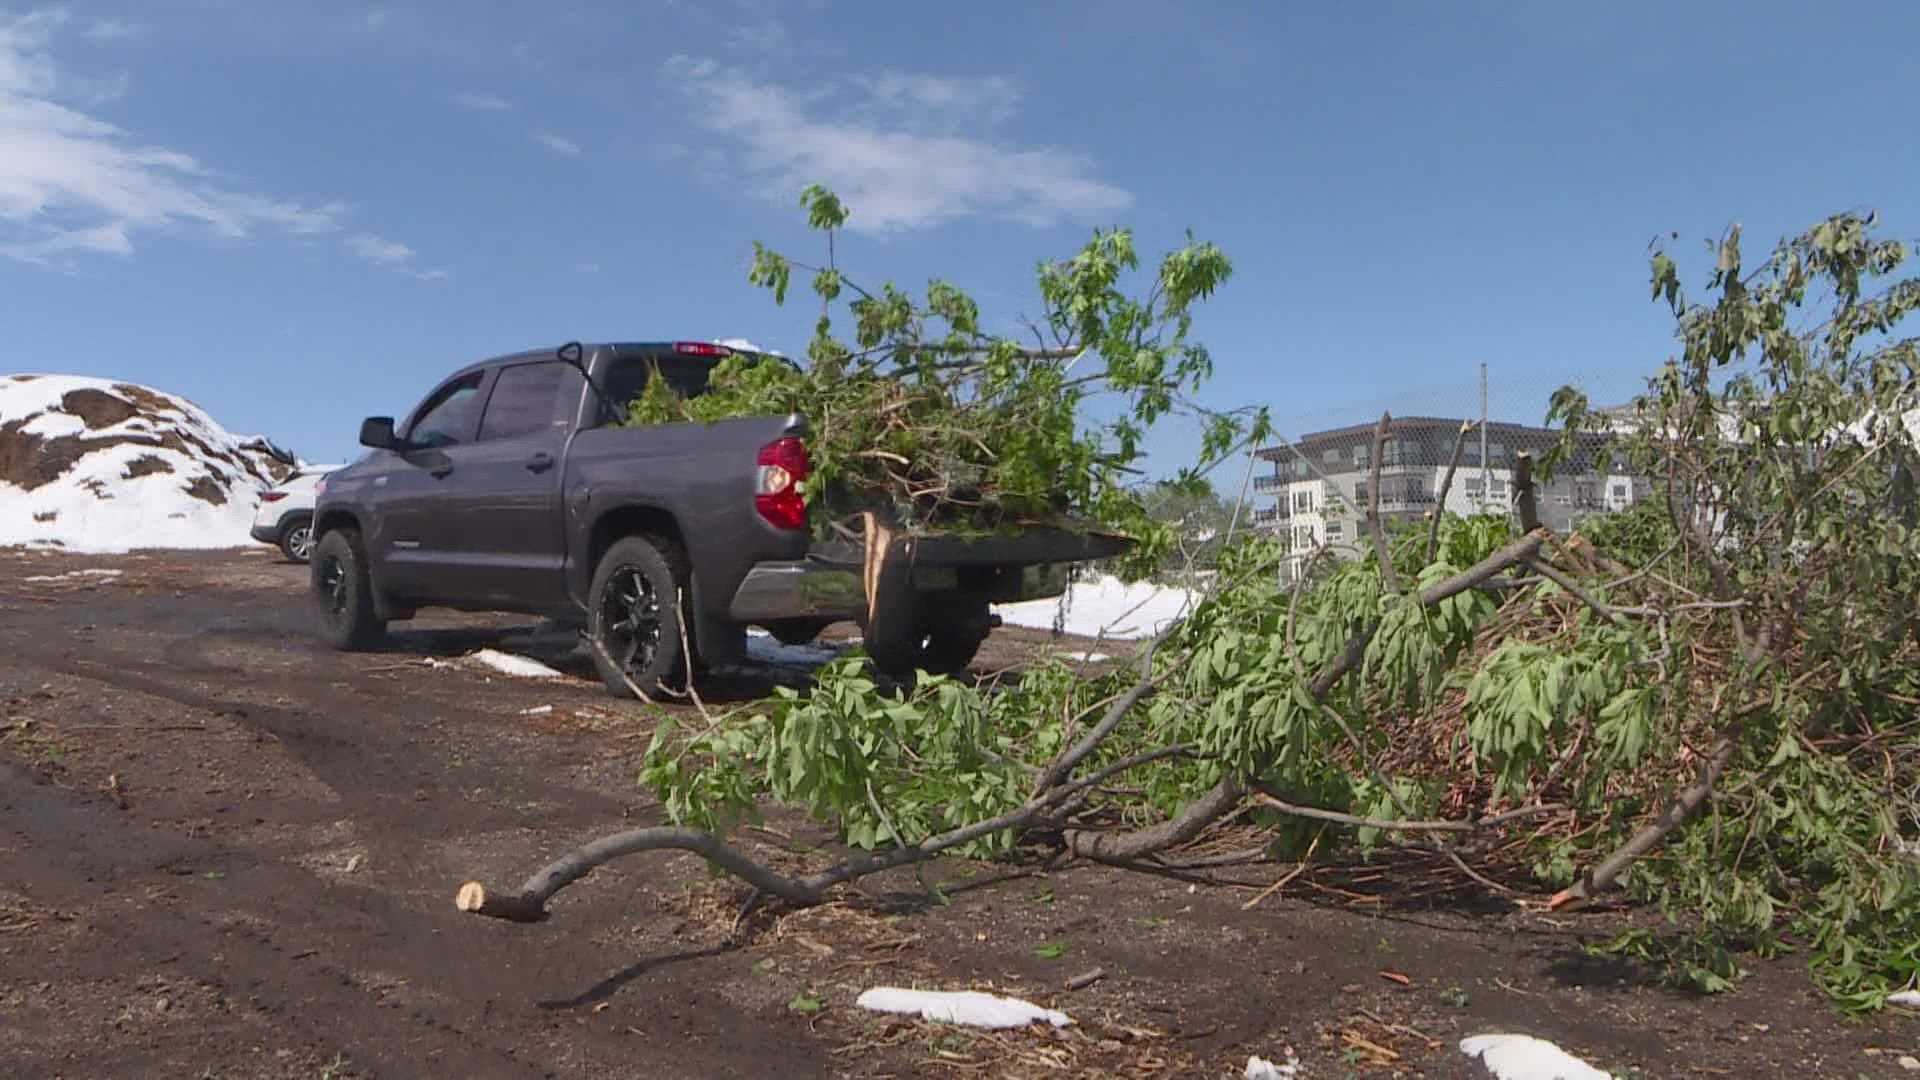 Denver and the surrounding cities have drop-off locations for all those branches that came down in the spring storm.